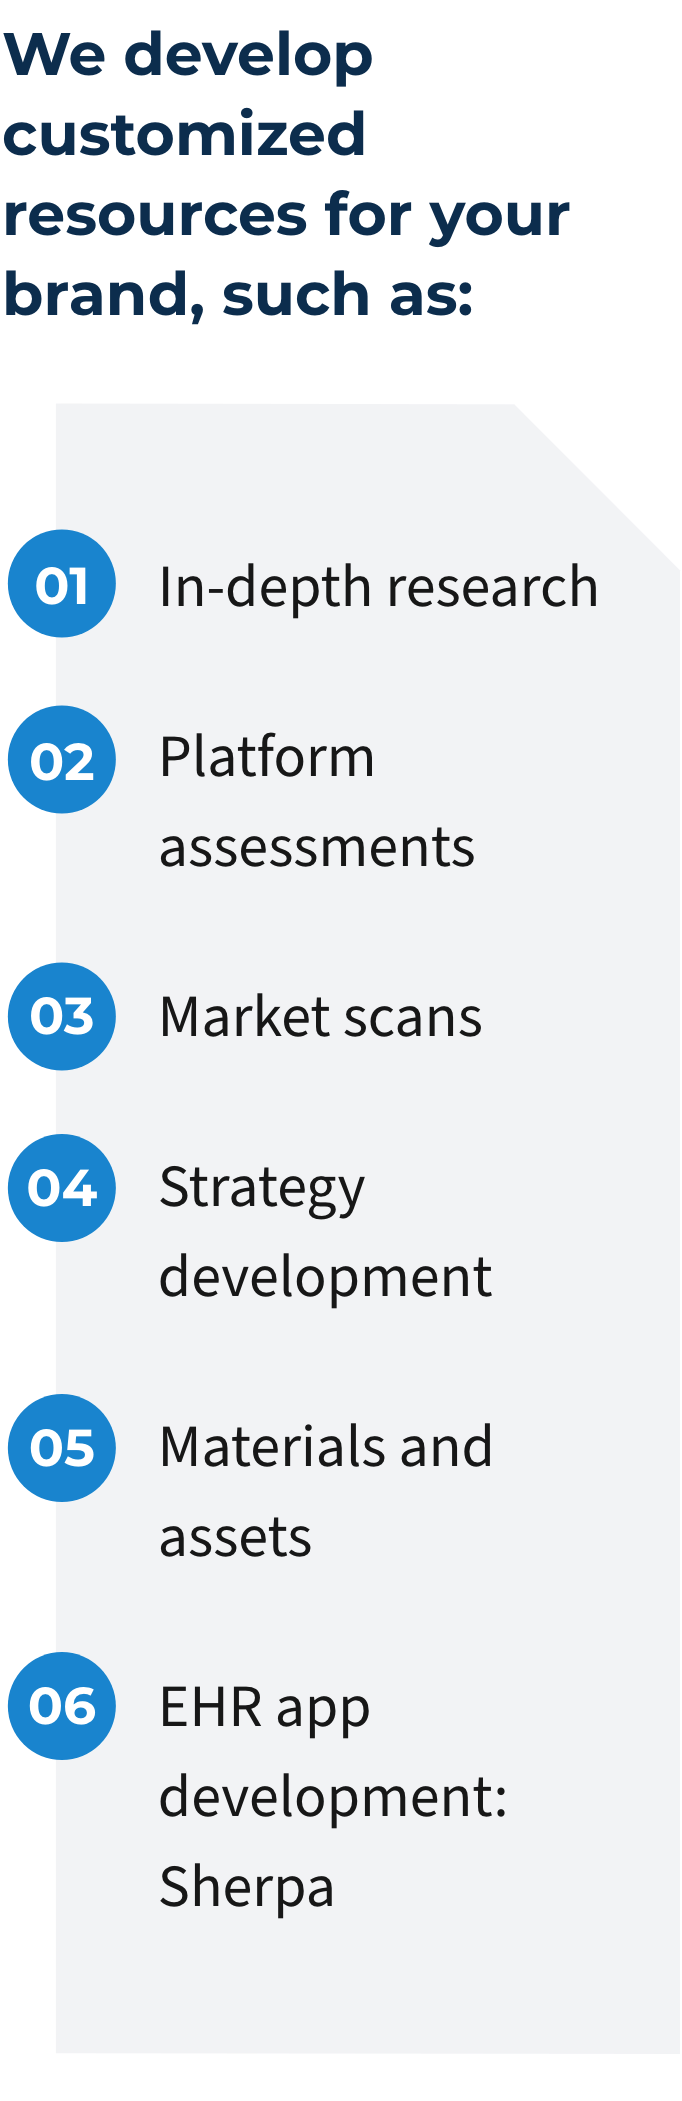 We develop customized resources for your brand, such as: 01 In-depth research, 02 Platform assessments, 03 Market scans, 04 Strategy development, 05 Materials and assets, 06 EHR app development: Sherpa